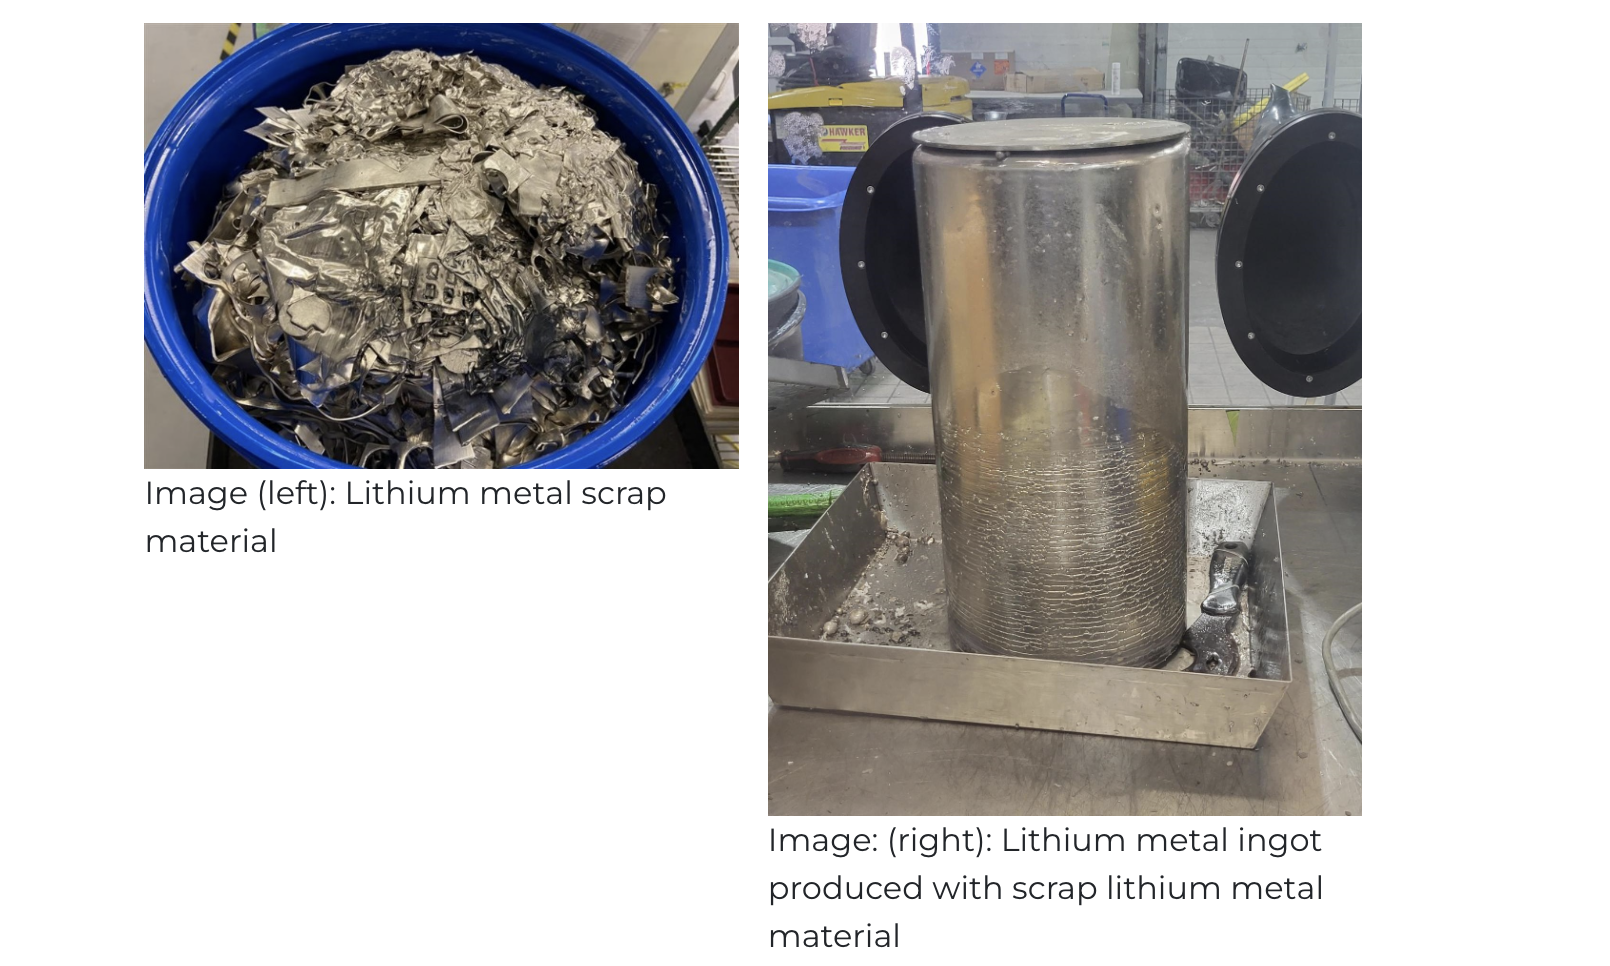 Li-Metal lithium metal production process: The 200 Best Inventions